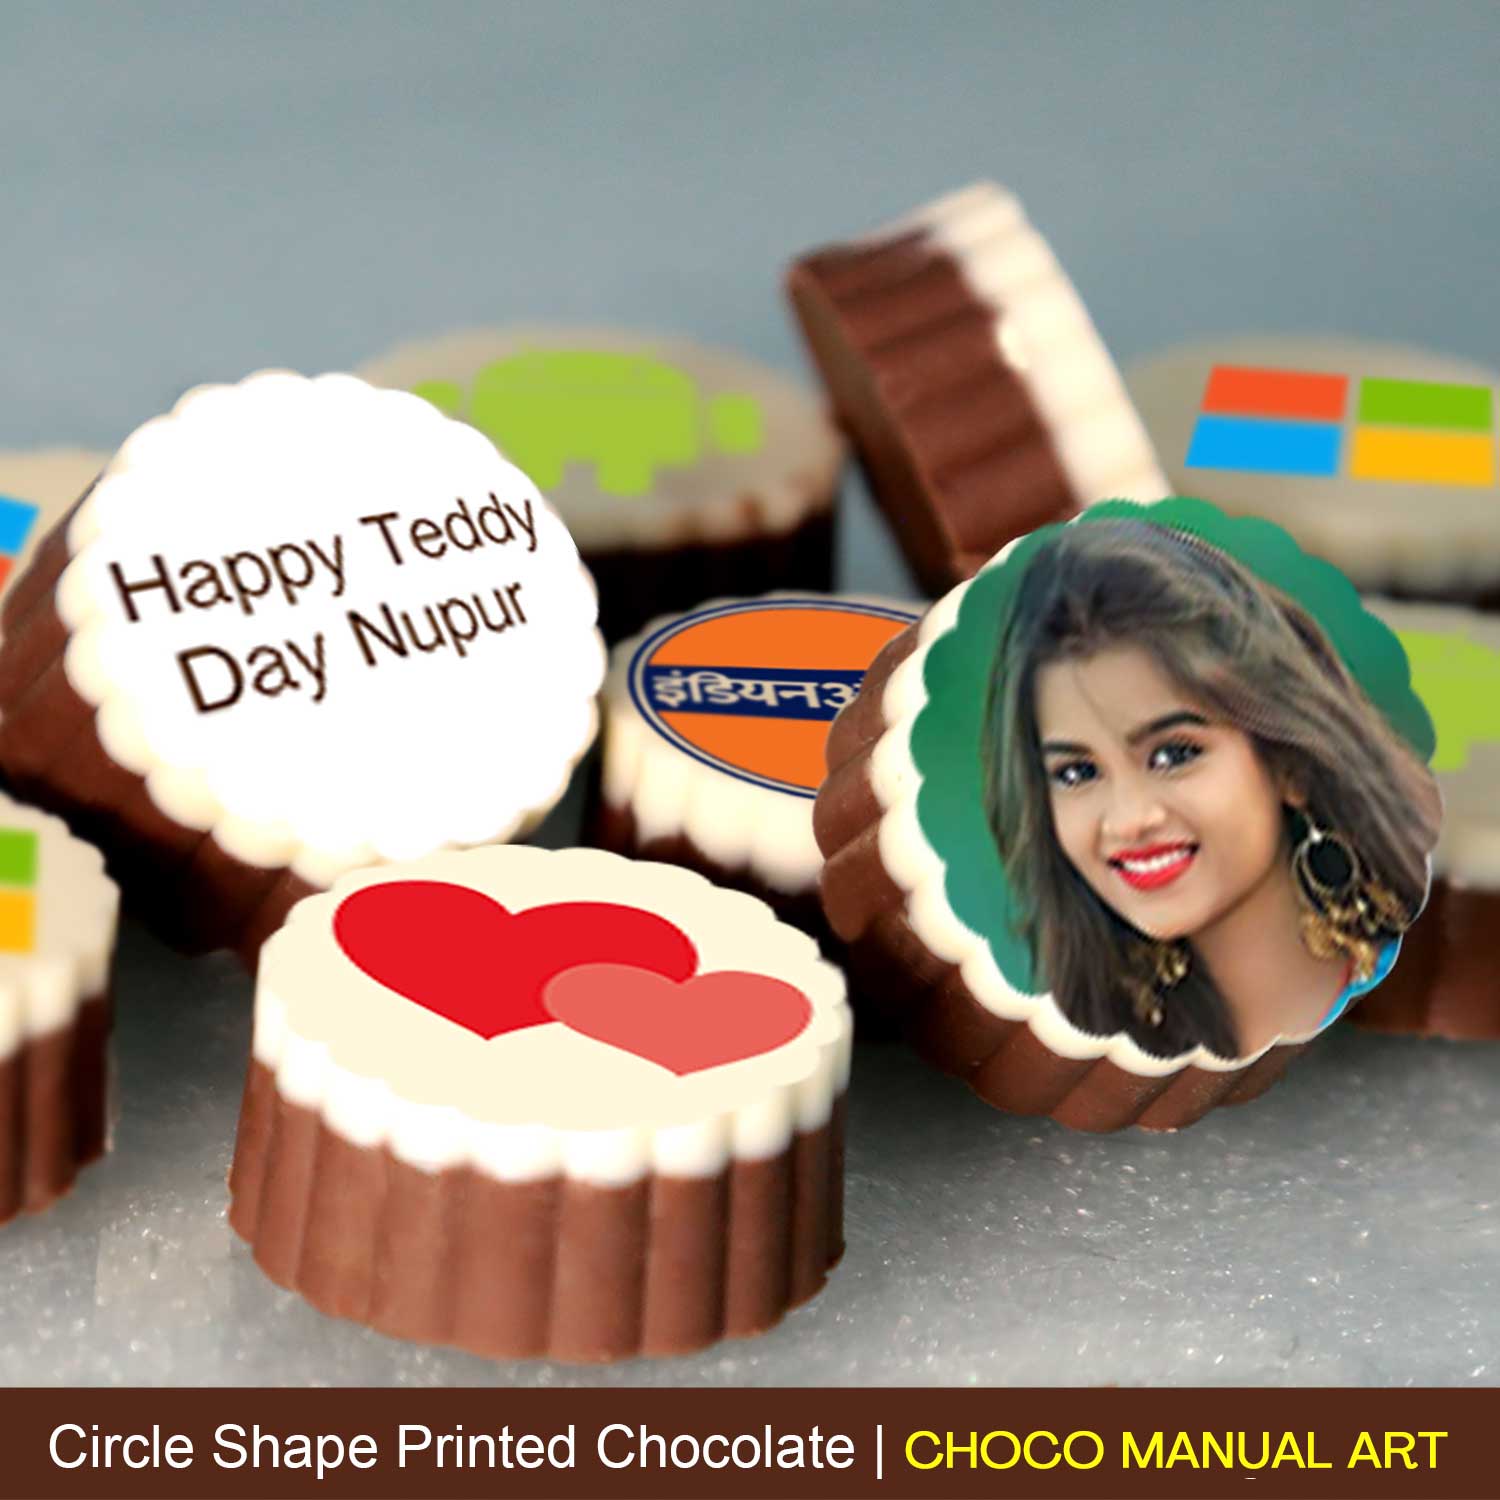 Unique Teddy Day Customised Chocolate gift